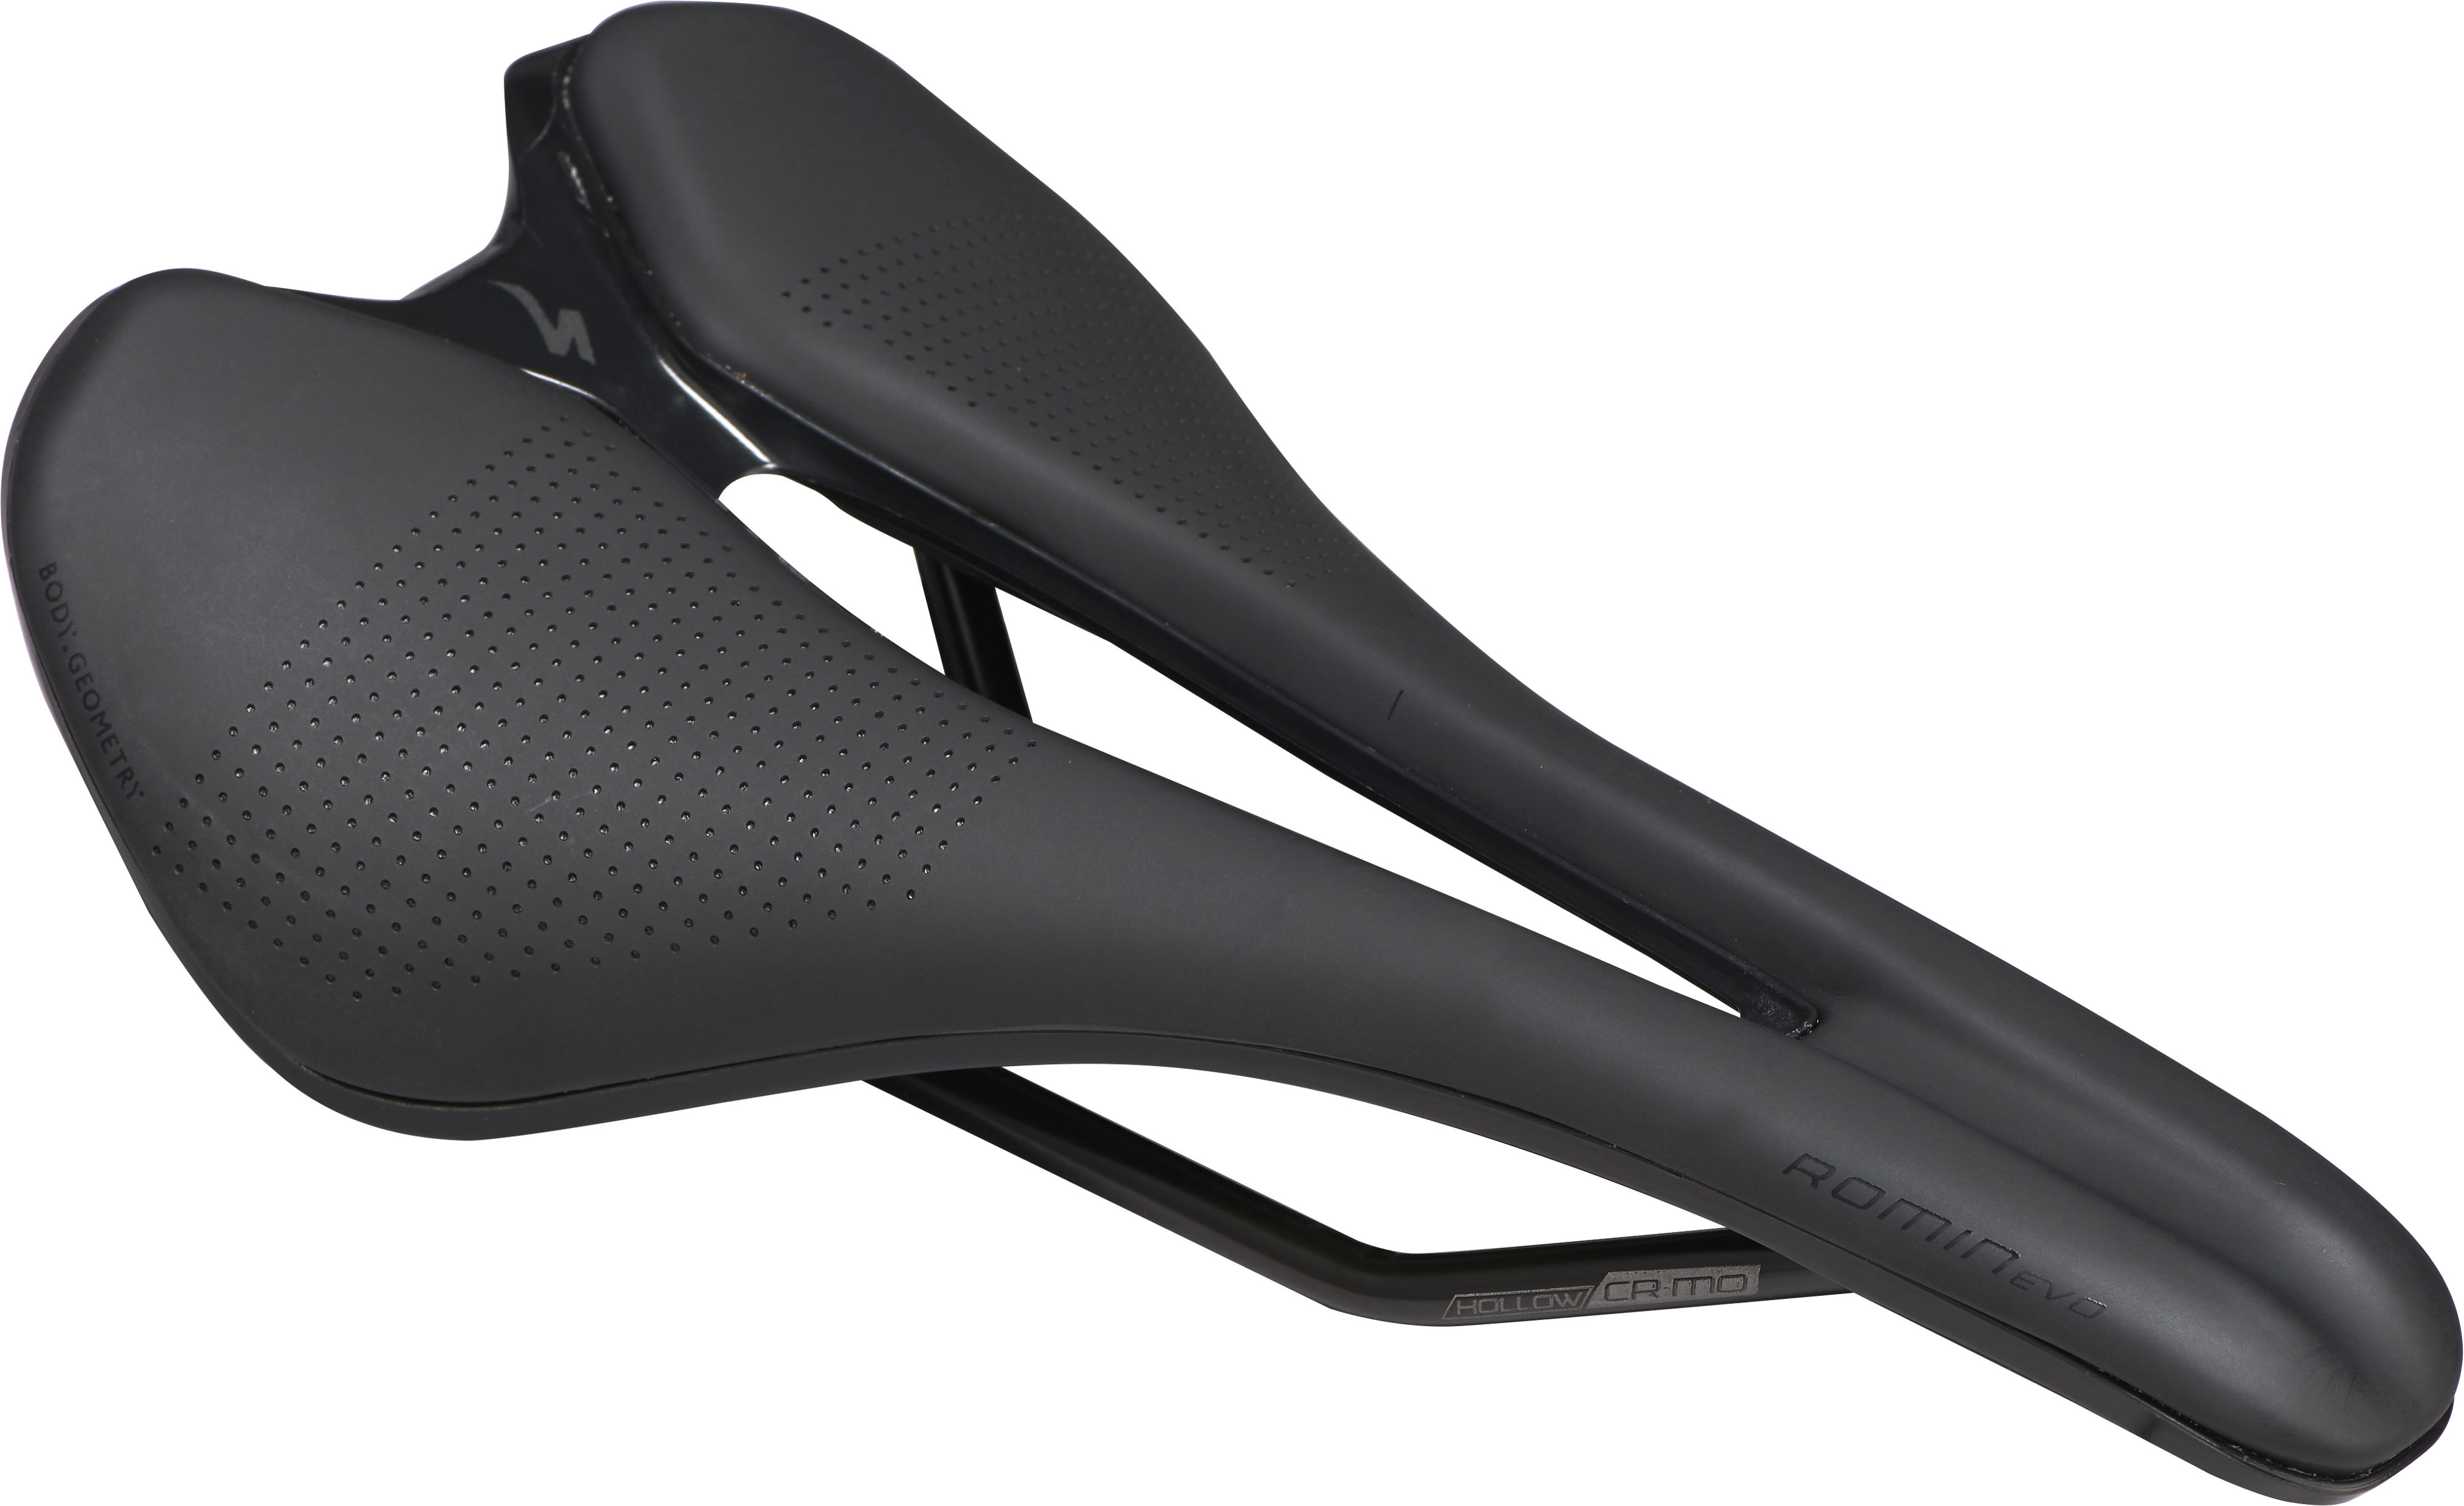 Specialized  Romin Evo Comp Gel Road Cycling Saddle in Black 155MM Black